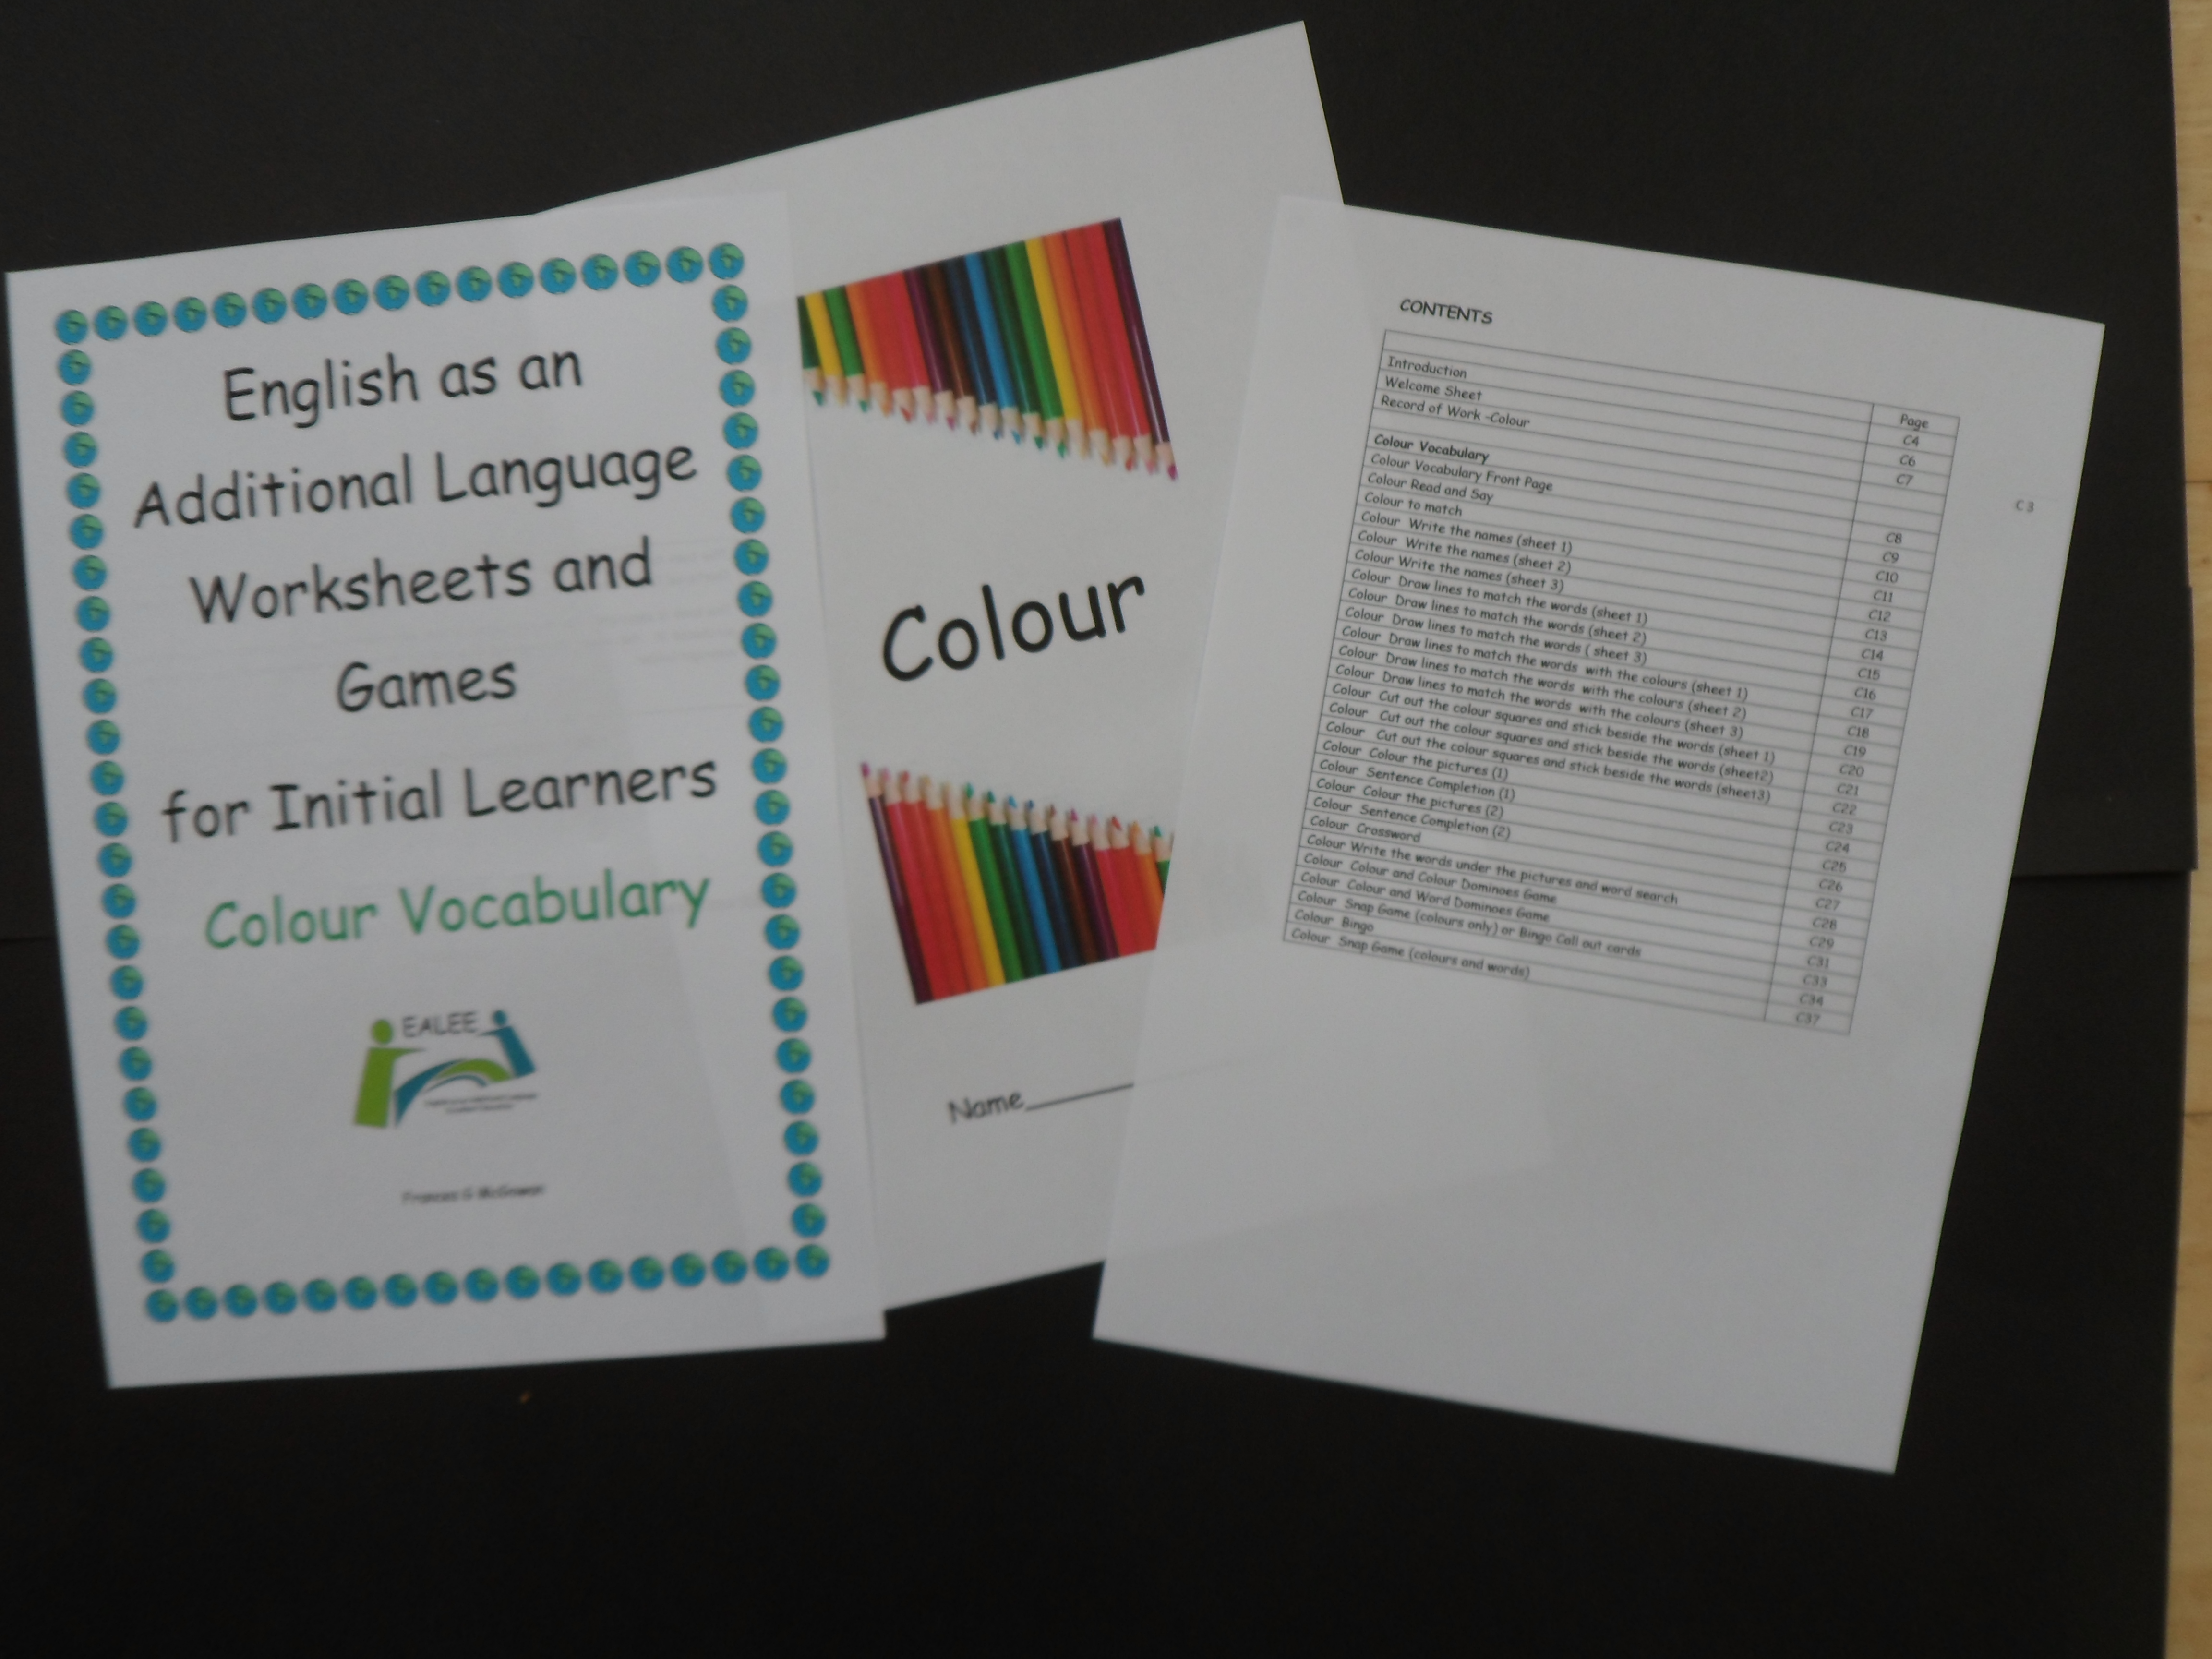 EAL/ESL worksheets and games for Initial Learners Colour Vocabulary